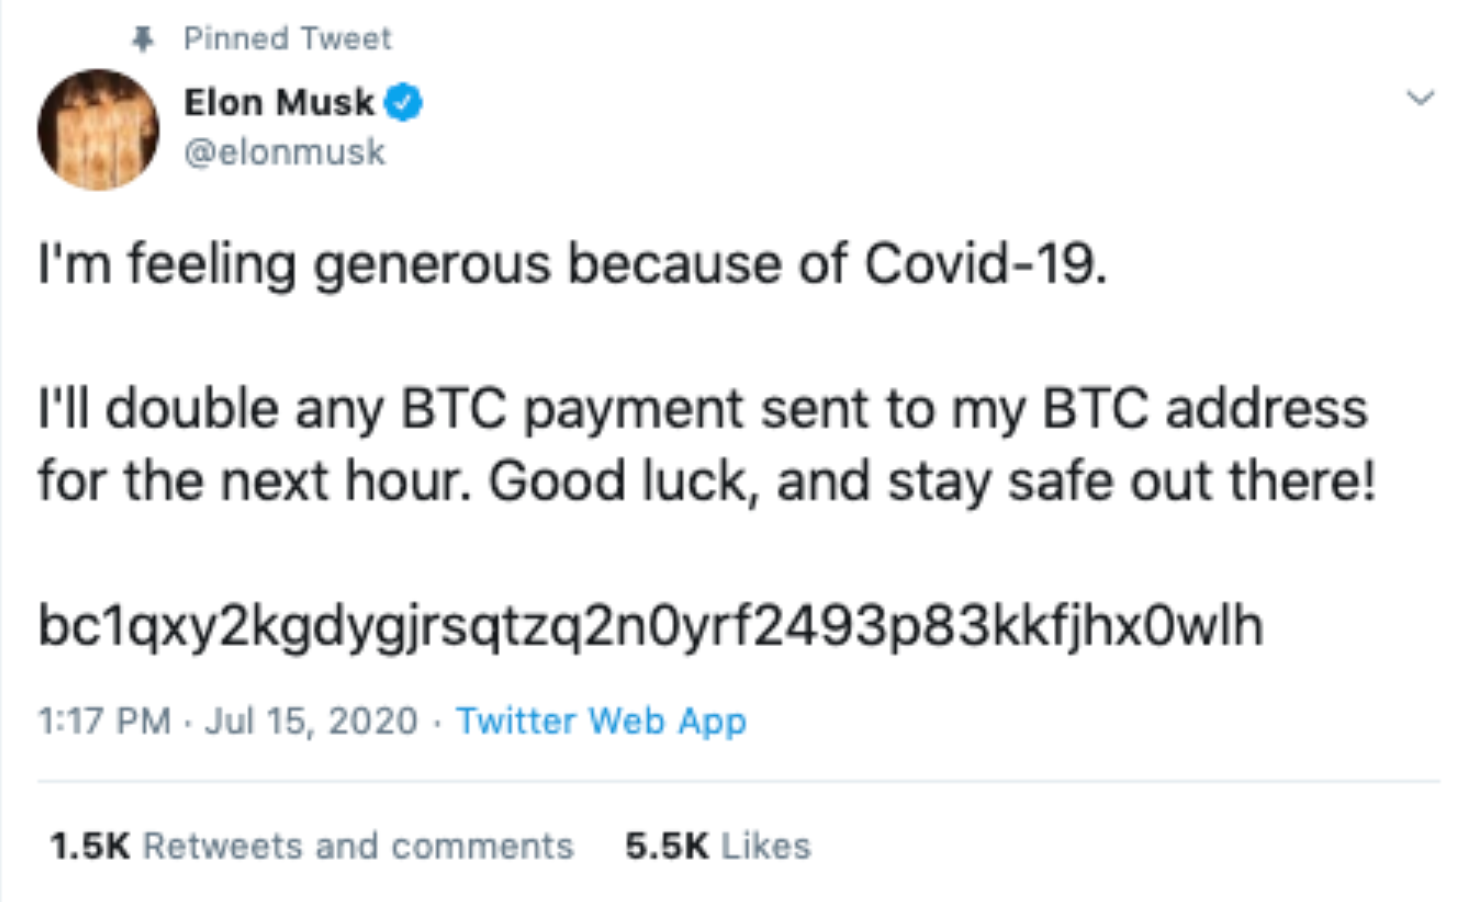 Initial public offering - Pinned Tweet Elon Musk I'm feeling generous because of Covid19. I'll double any Btc payment sent to my Btc address for the next hour. Good luck, and stay safe out there! bc1qxy2kgdygjrsatzq2n0yrfkfjhxOwlh . Twitter Web App and